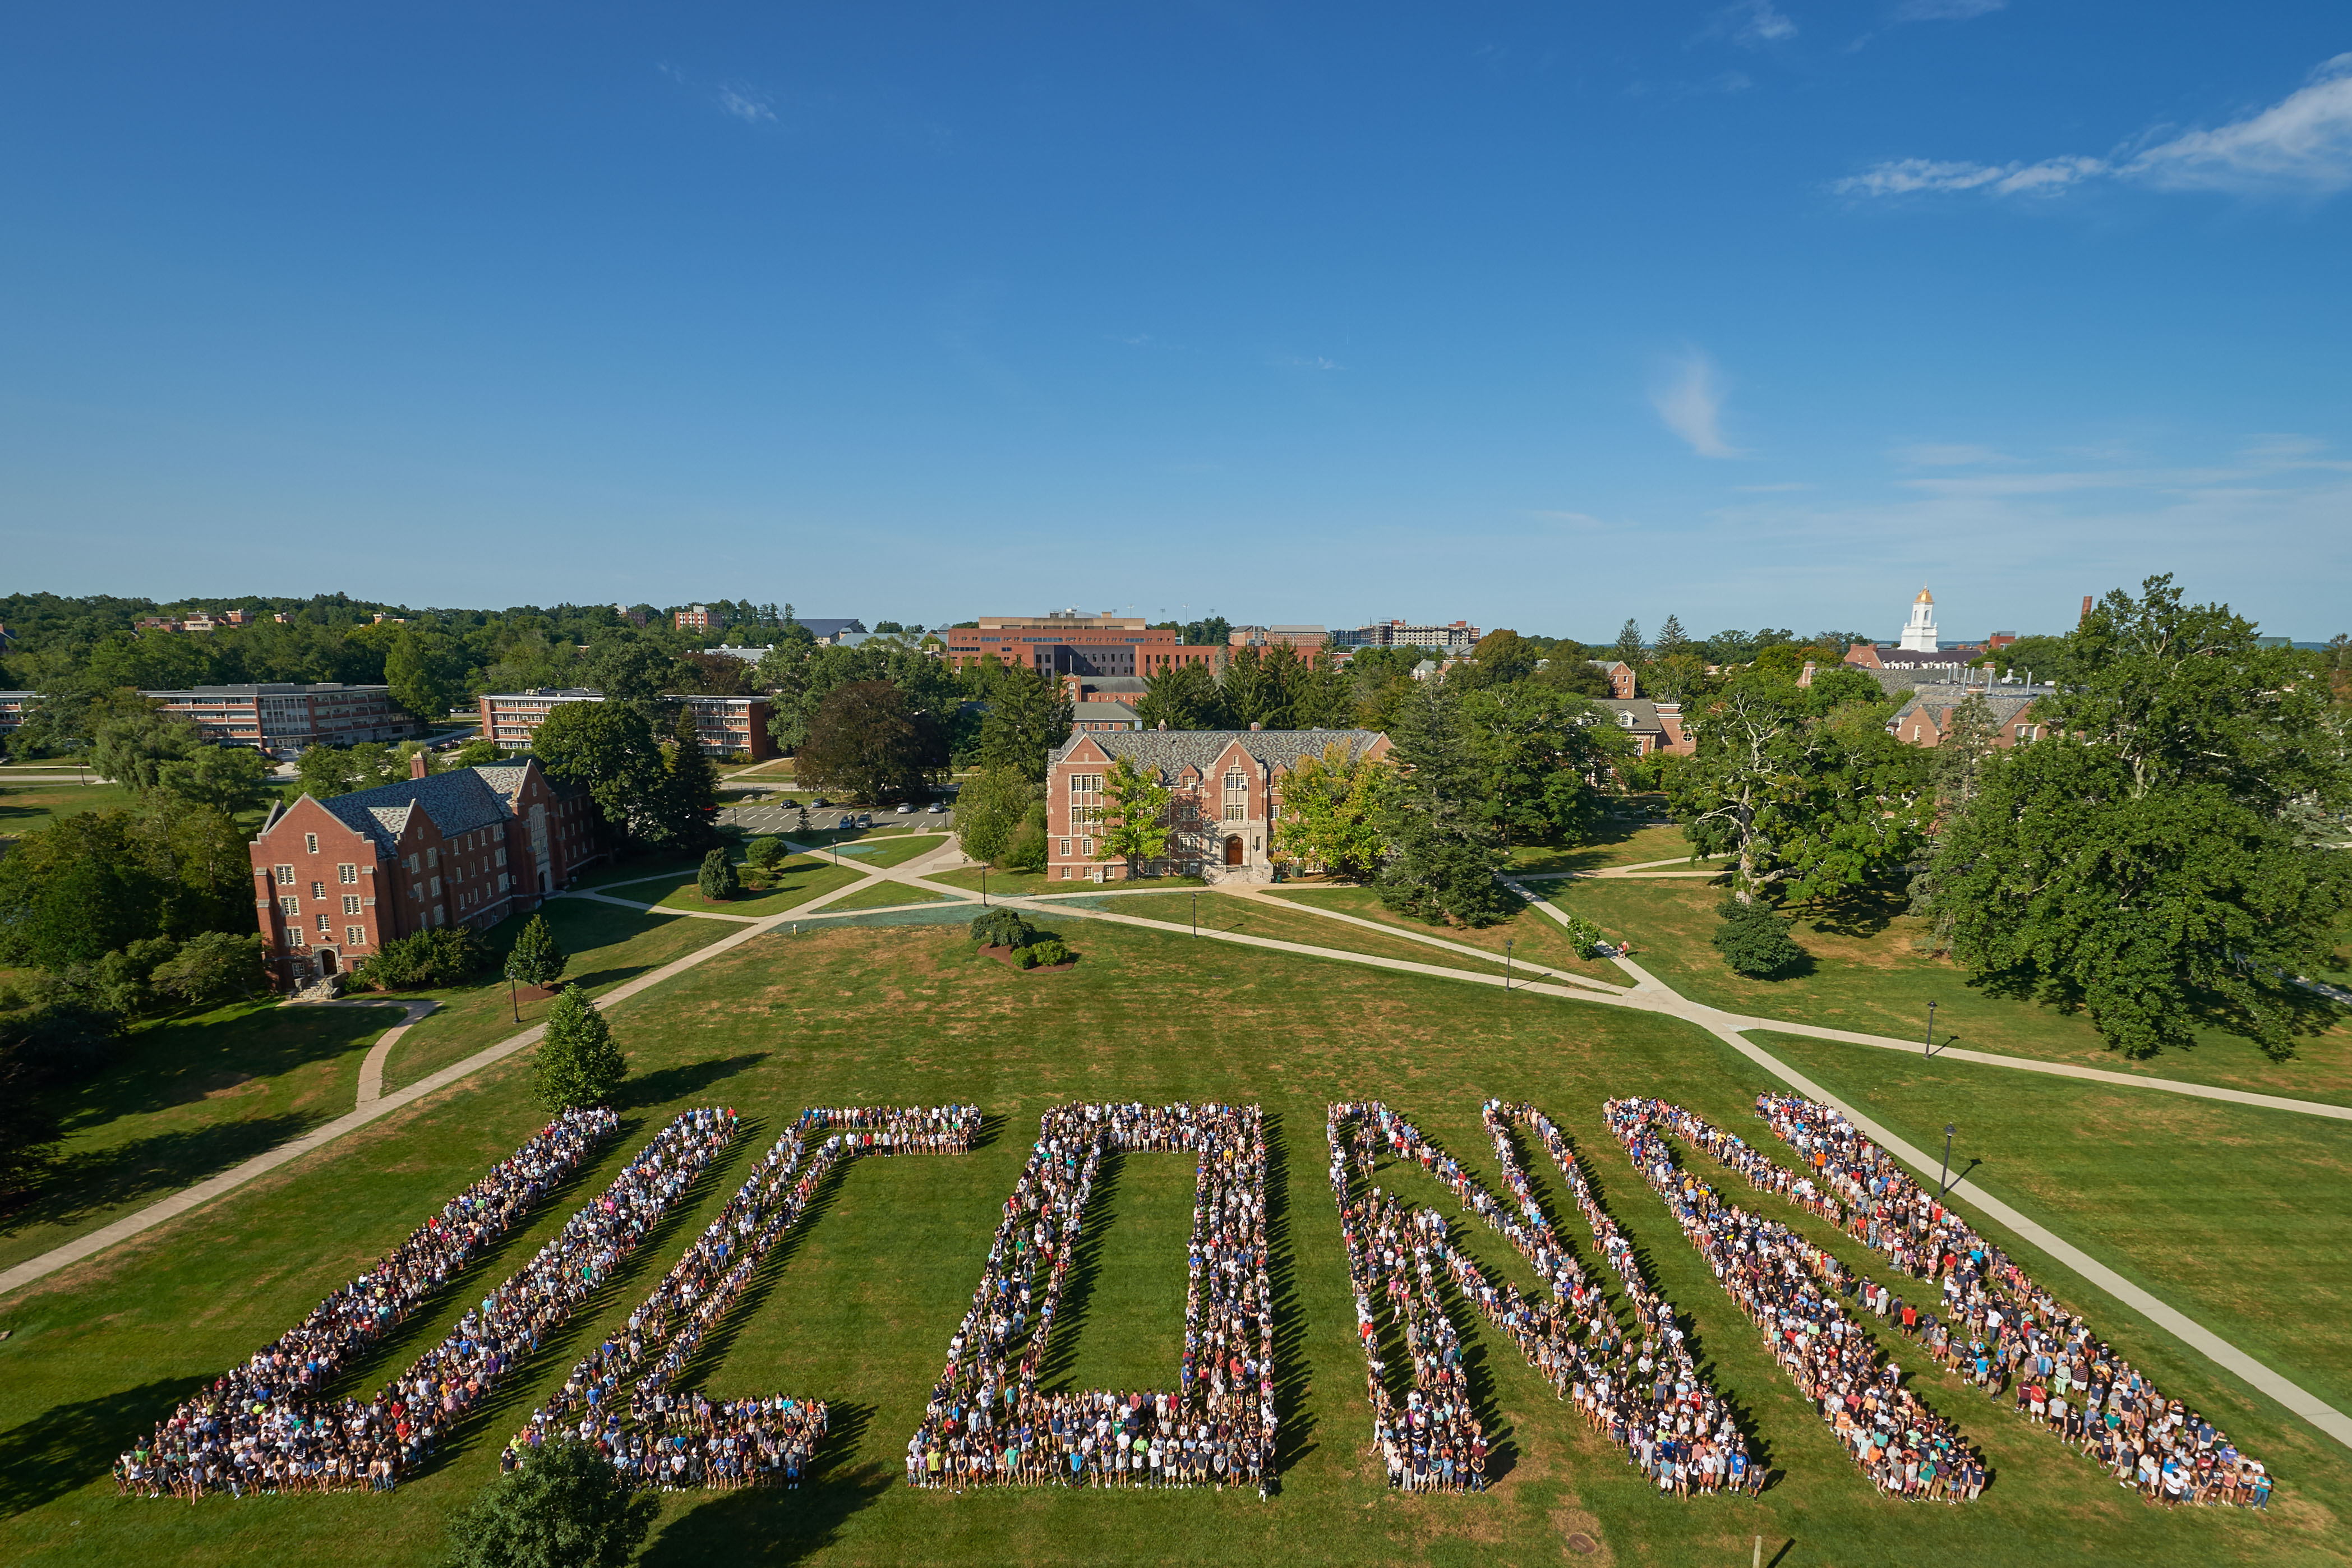 More than 3,000 members of the UConn Class of 2019 pose for a photo on the Great Lawn at the Storrs Campus on Aug. 29, 2015, at the start of their careers at UConn. (Peter Morenus/UConn Photo)